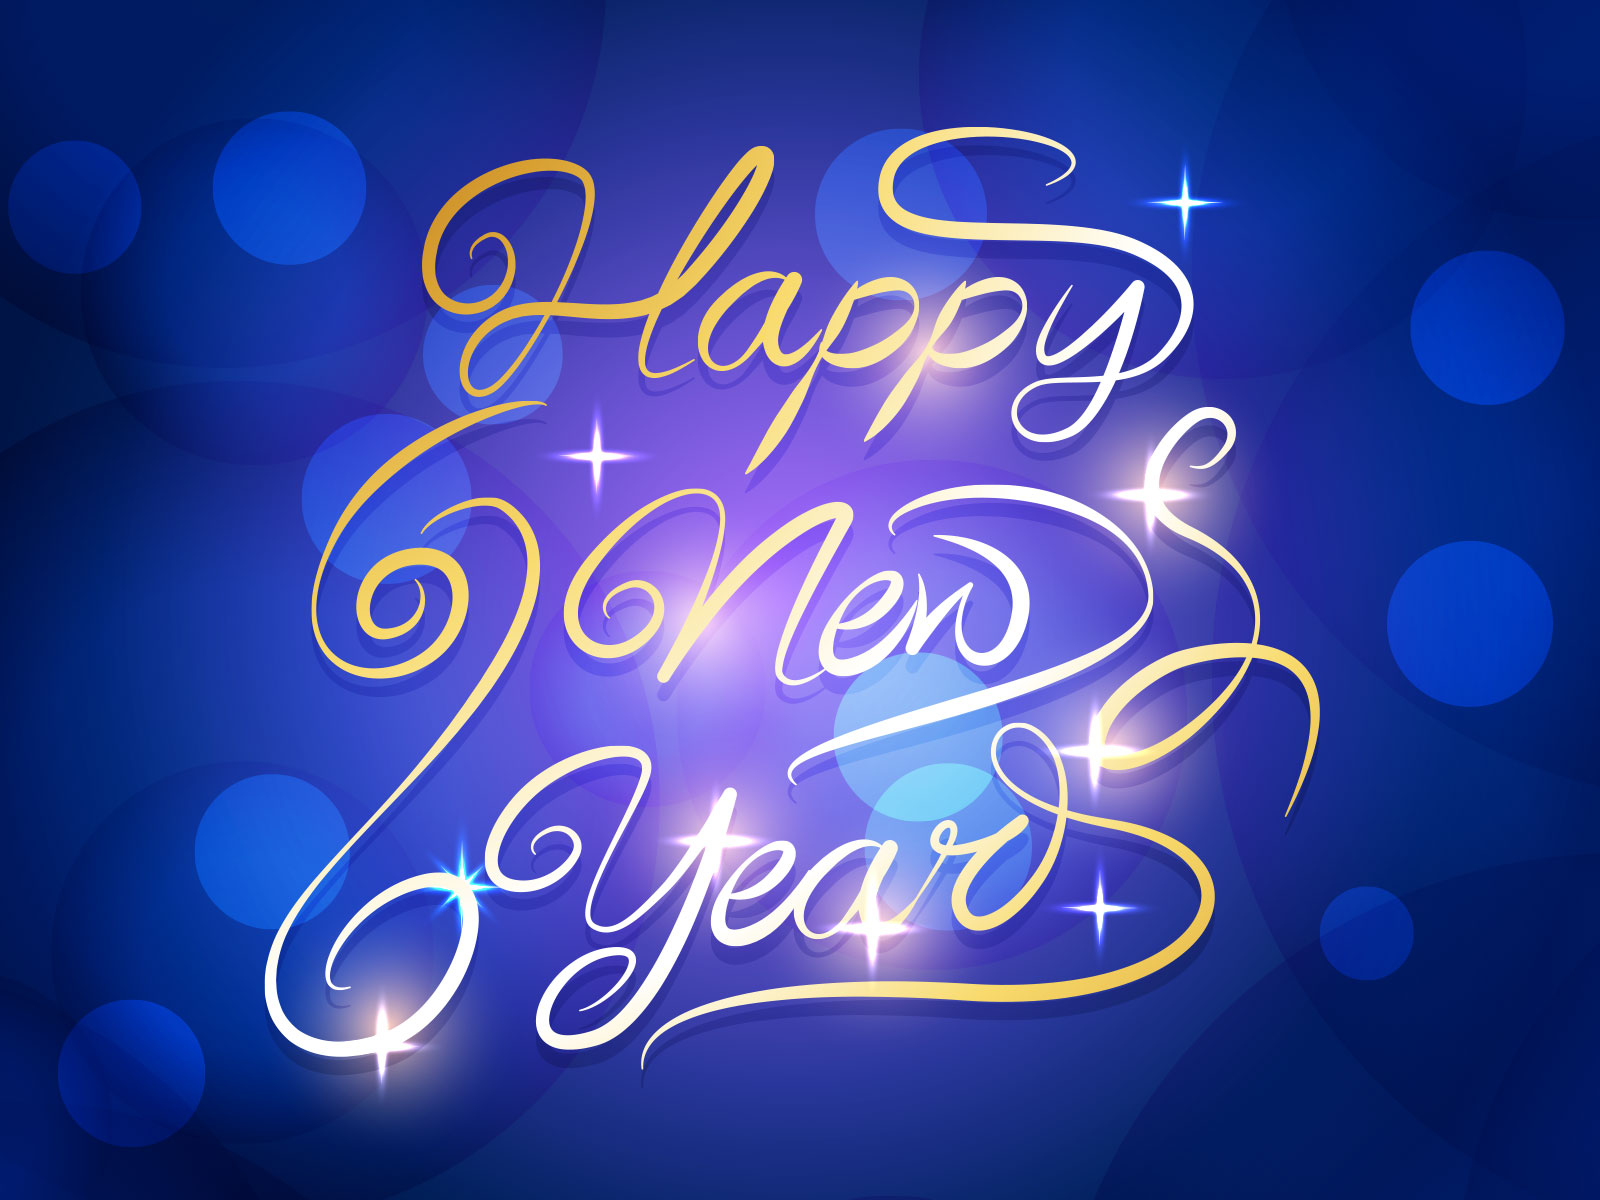 Happy New Year Wishes Quotes Messages Images Greetings ...